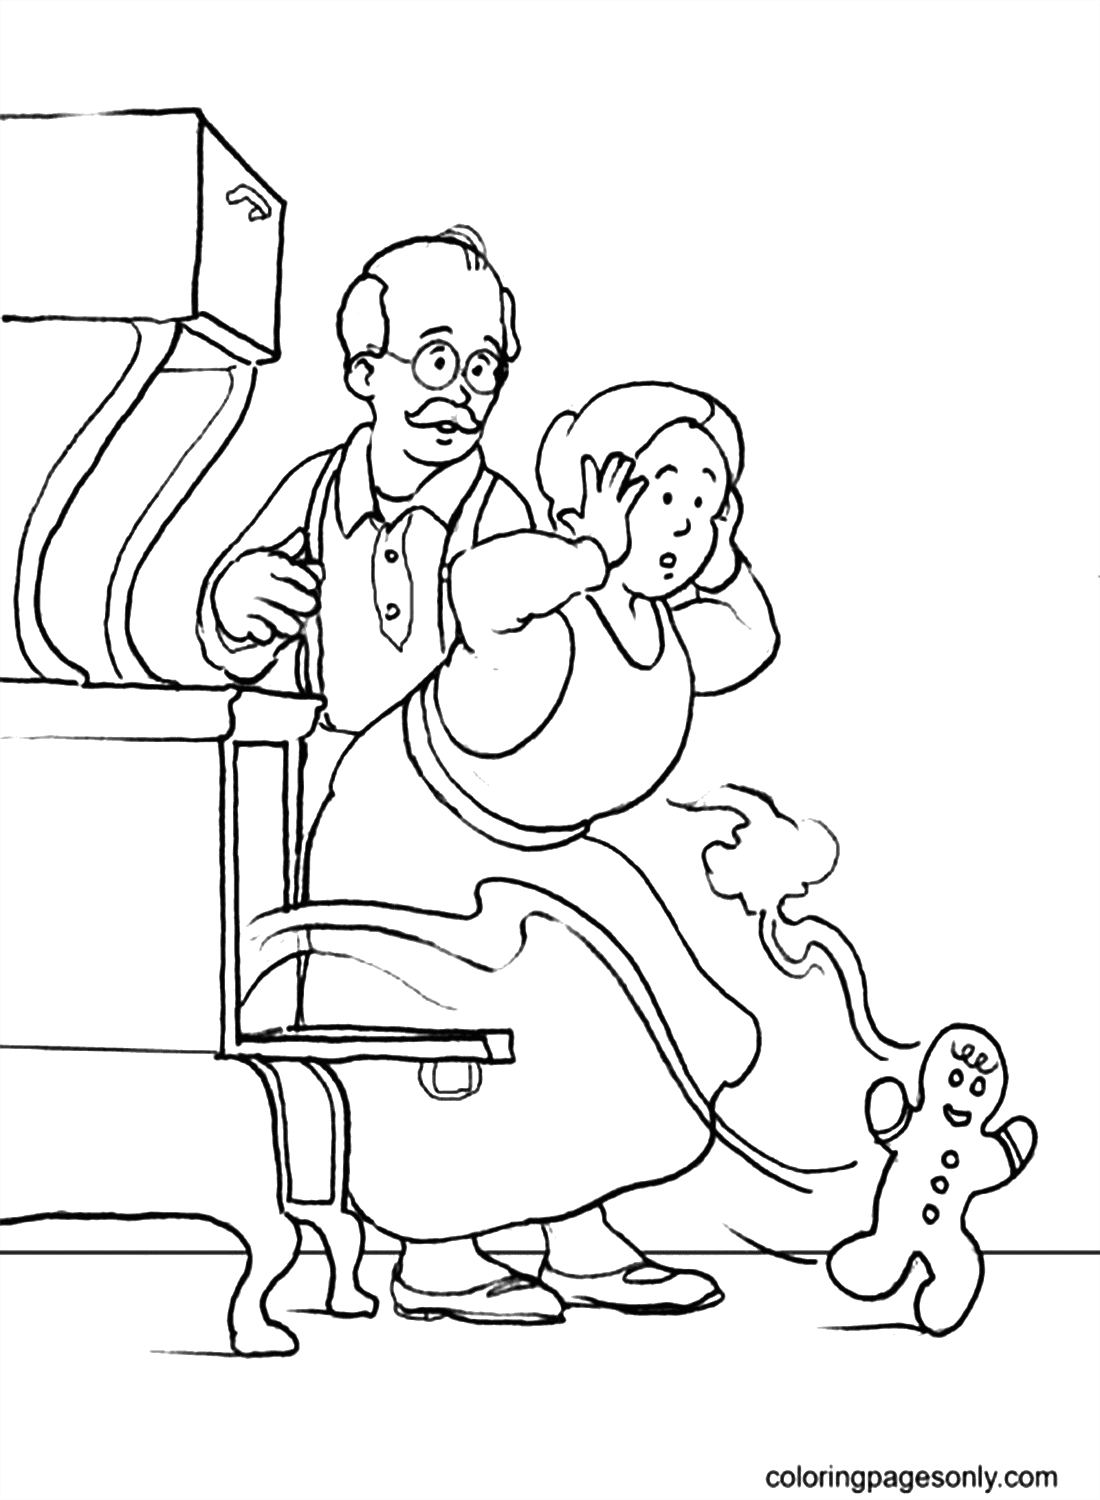 Gingerbread Man Escape From Oven Coloring Pages